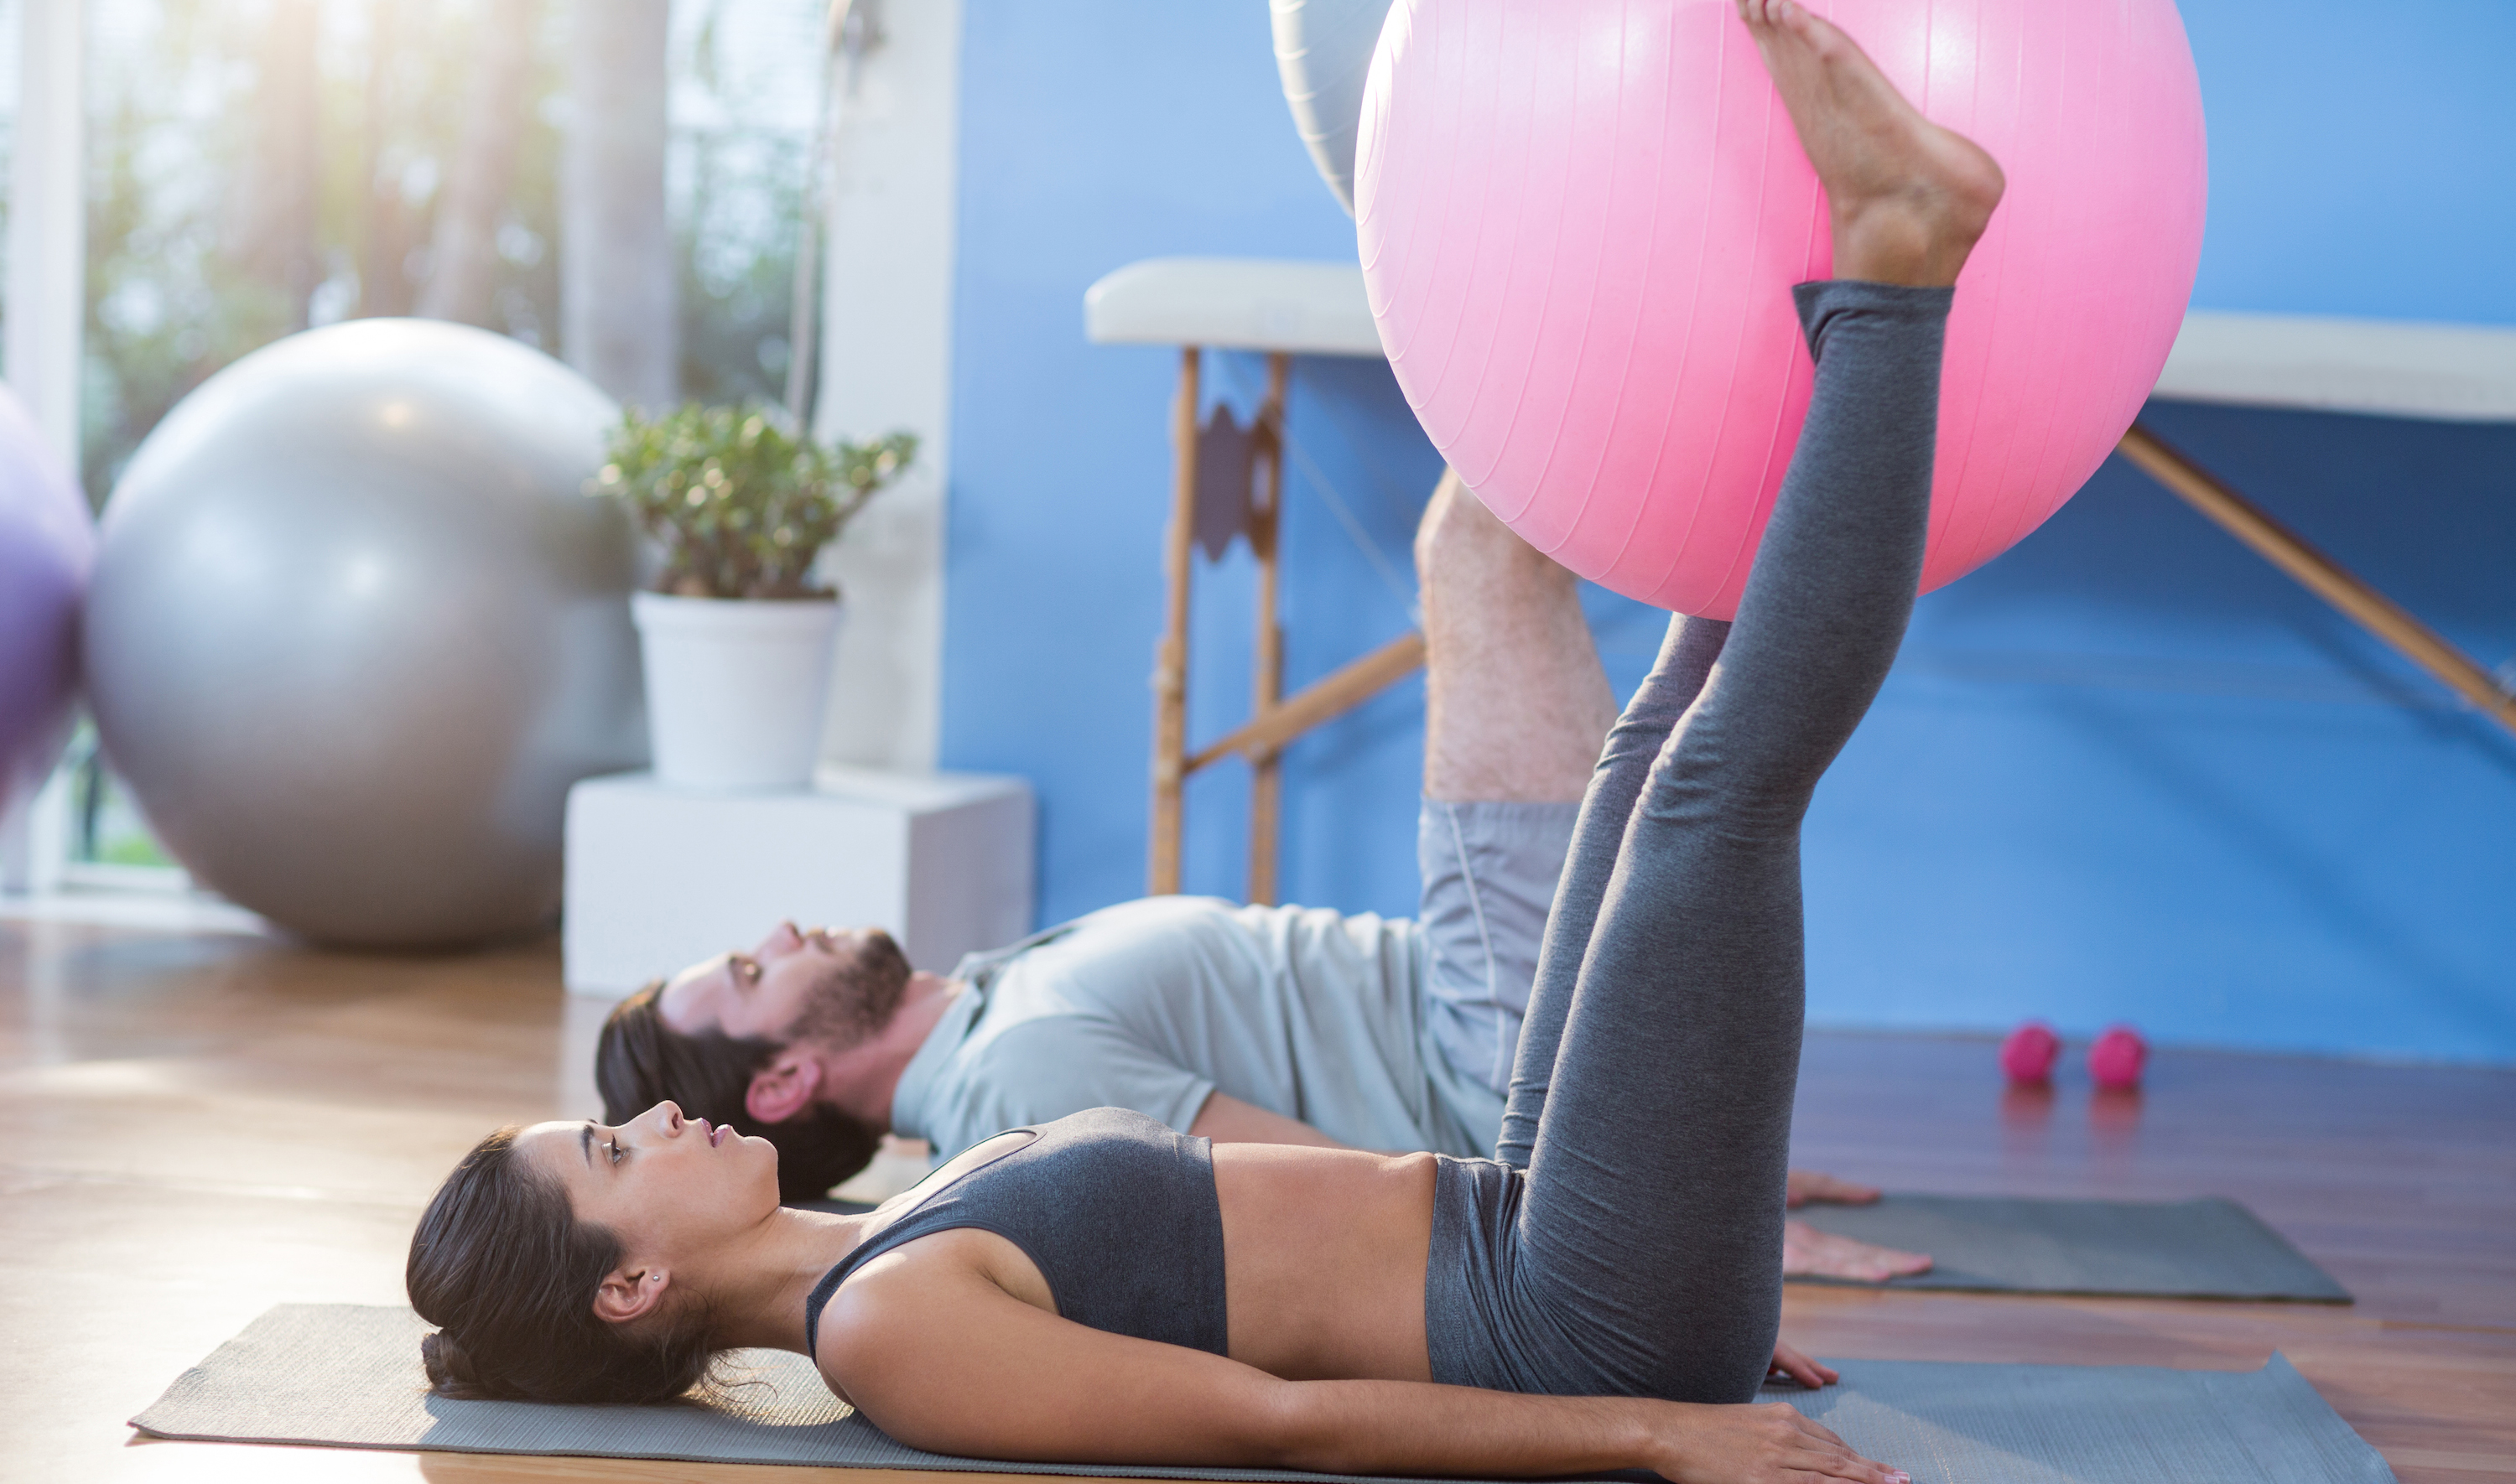 Blog: 7 Pelvic Floor Exercises You Can (And Should) Do At Home